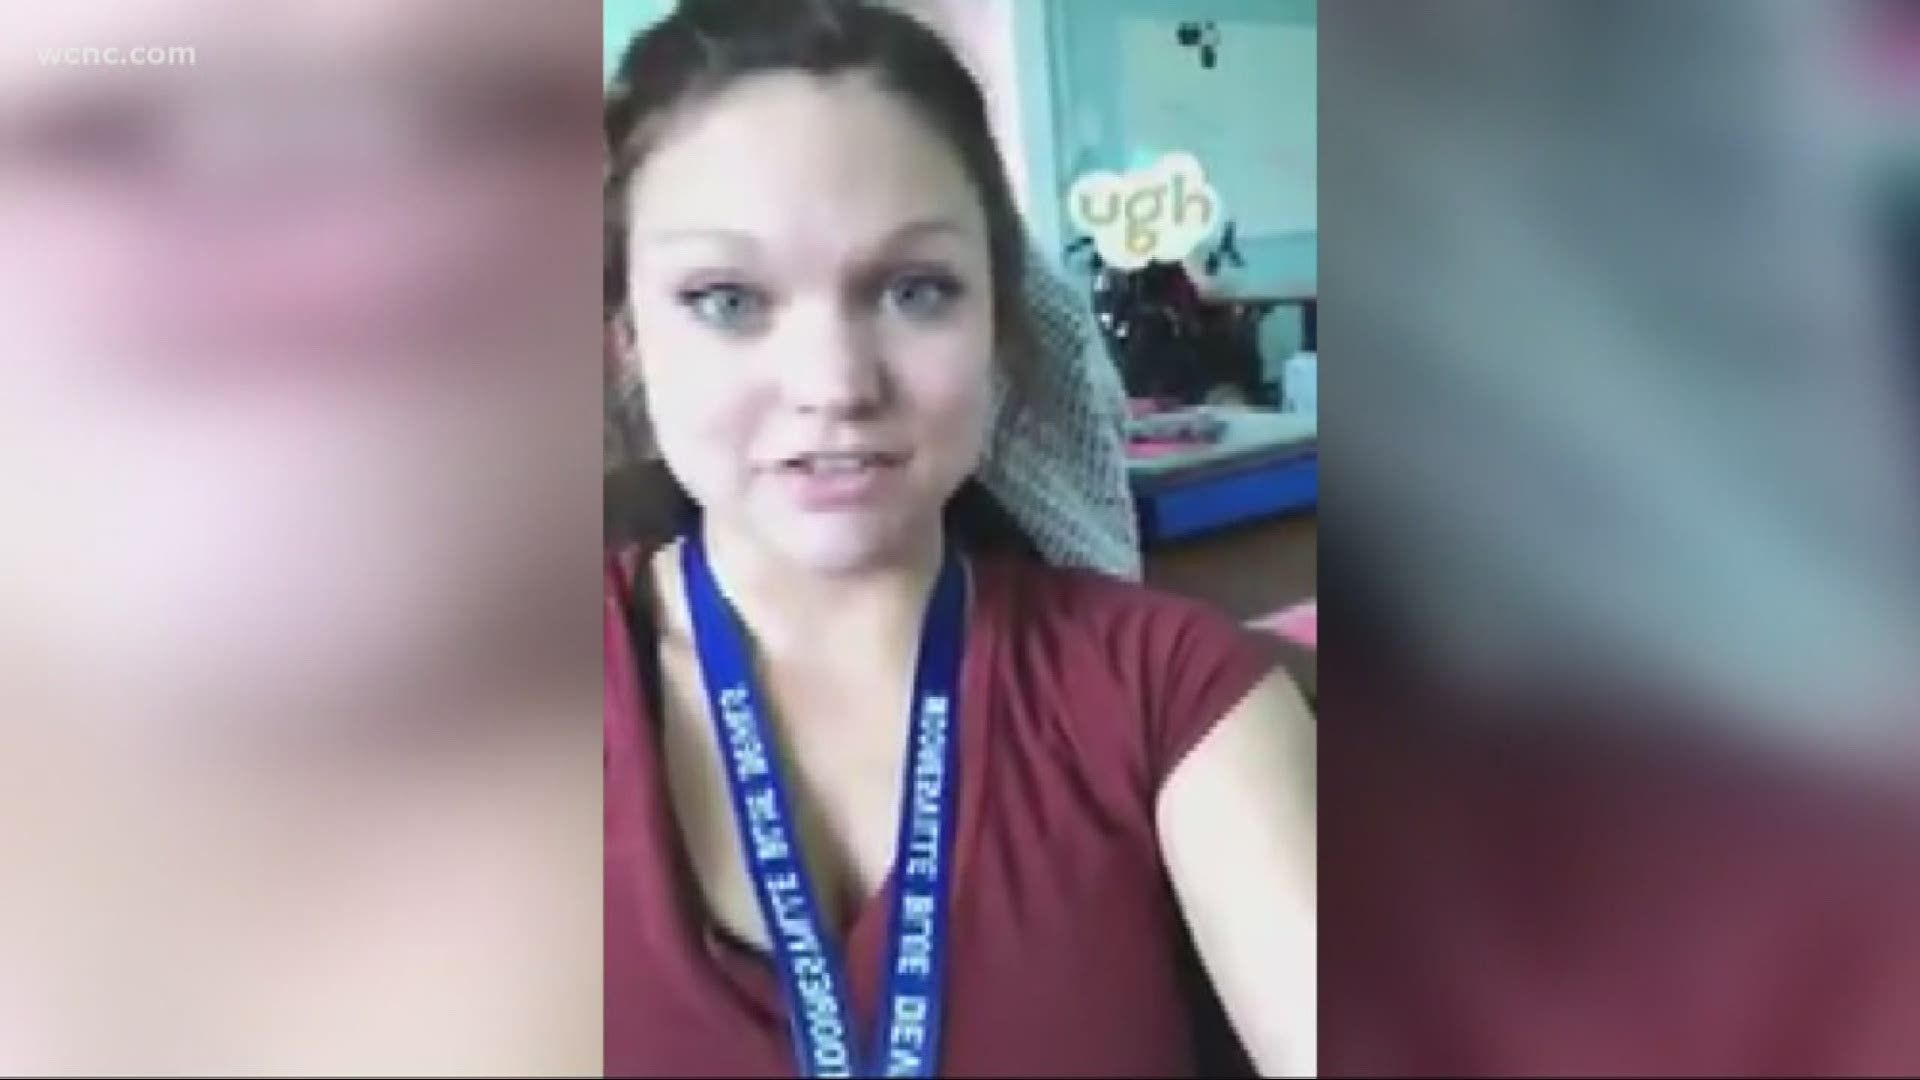 The video, shared with NBC Charlotte by a viewer, is making the rounds on Facebook. Hundreds of people have left angry comments, and it's been viewed more than 30,000 times.